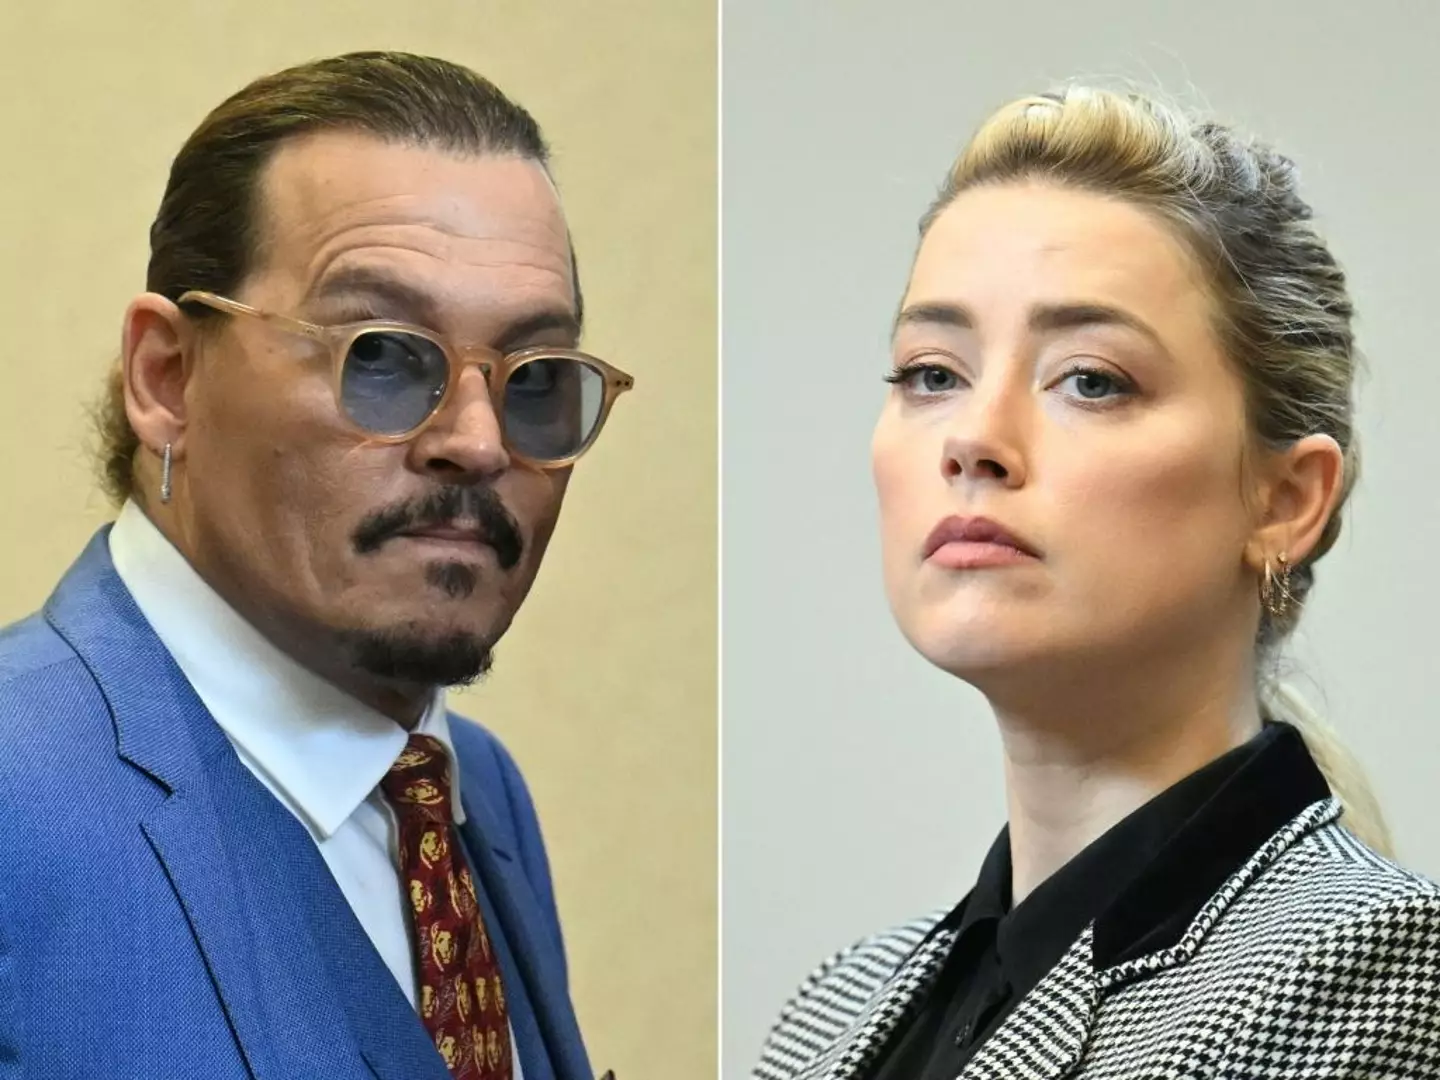 Amber Heard and Johnny Depp's trial was highly talked about (JIM WATSON/POOL/AFP via Getty Images)